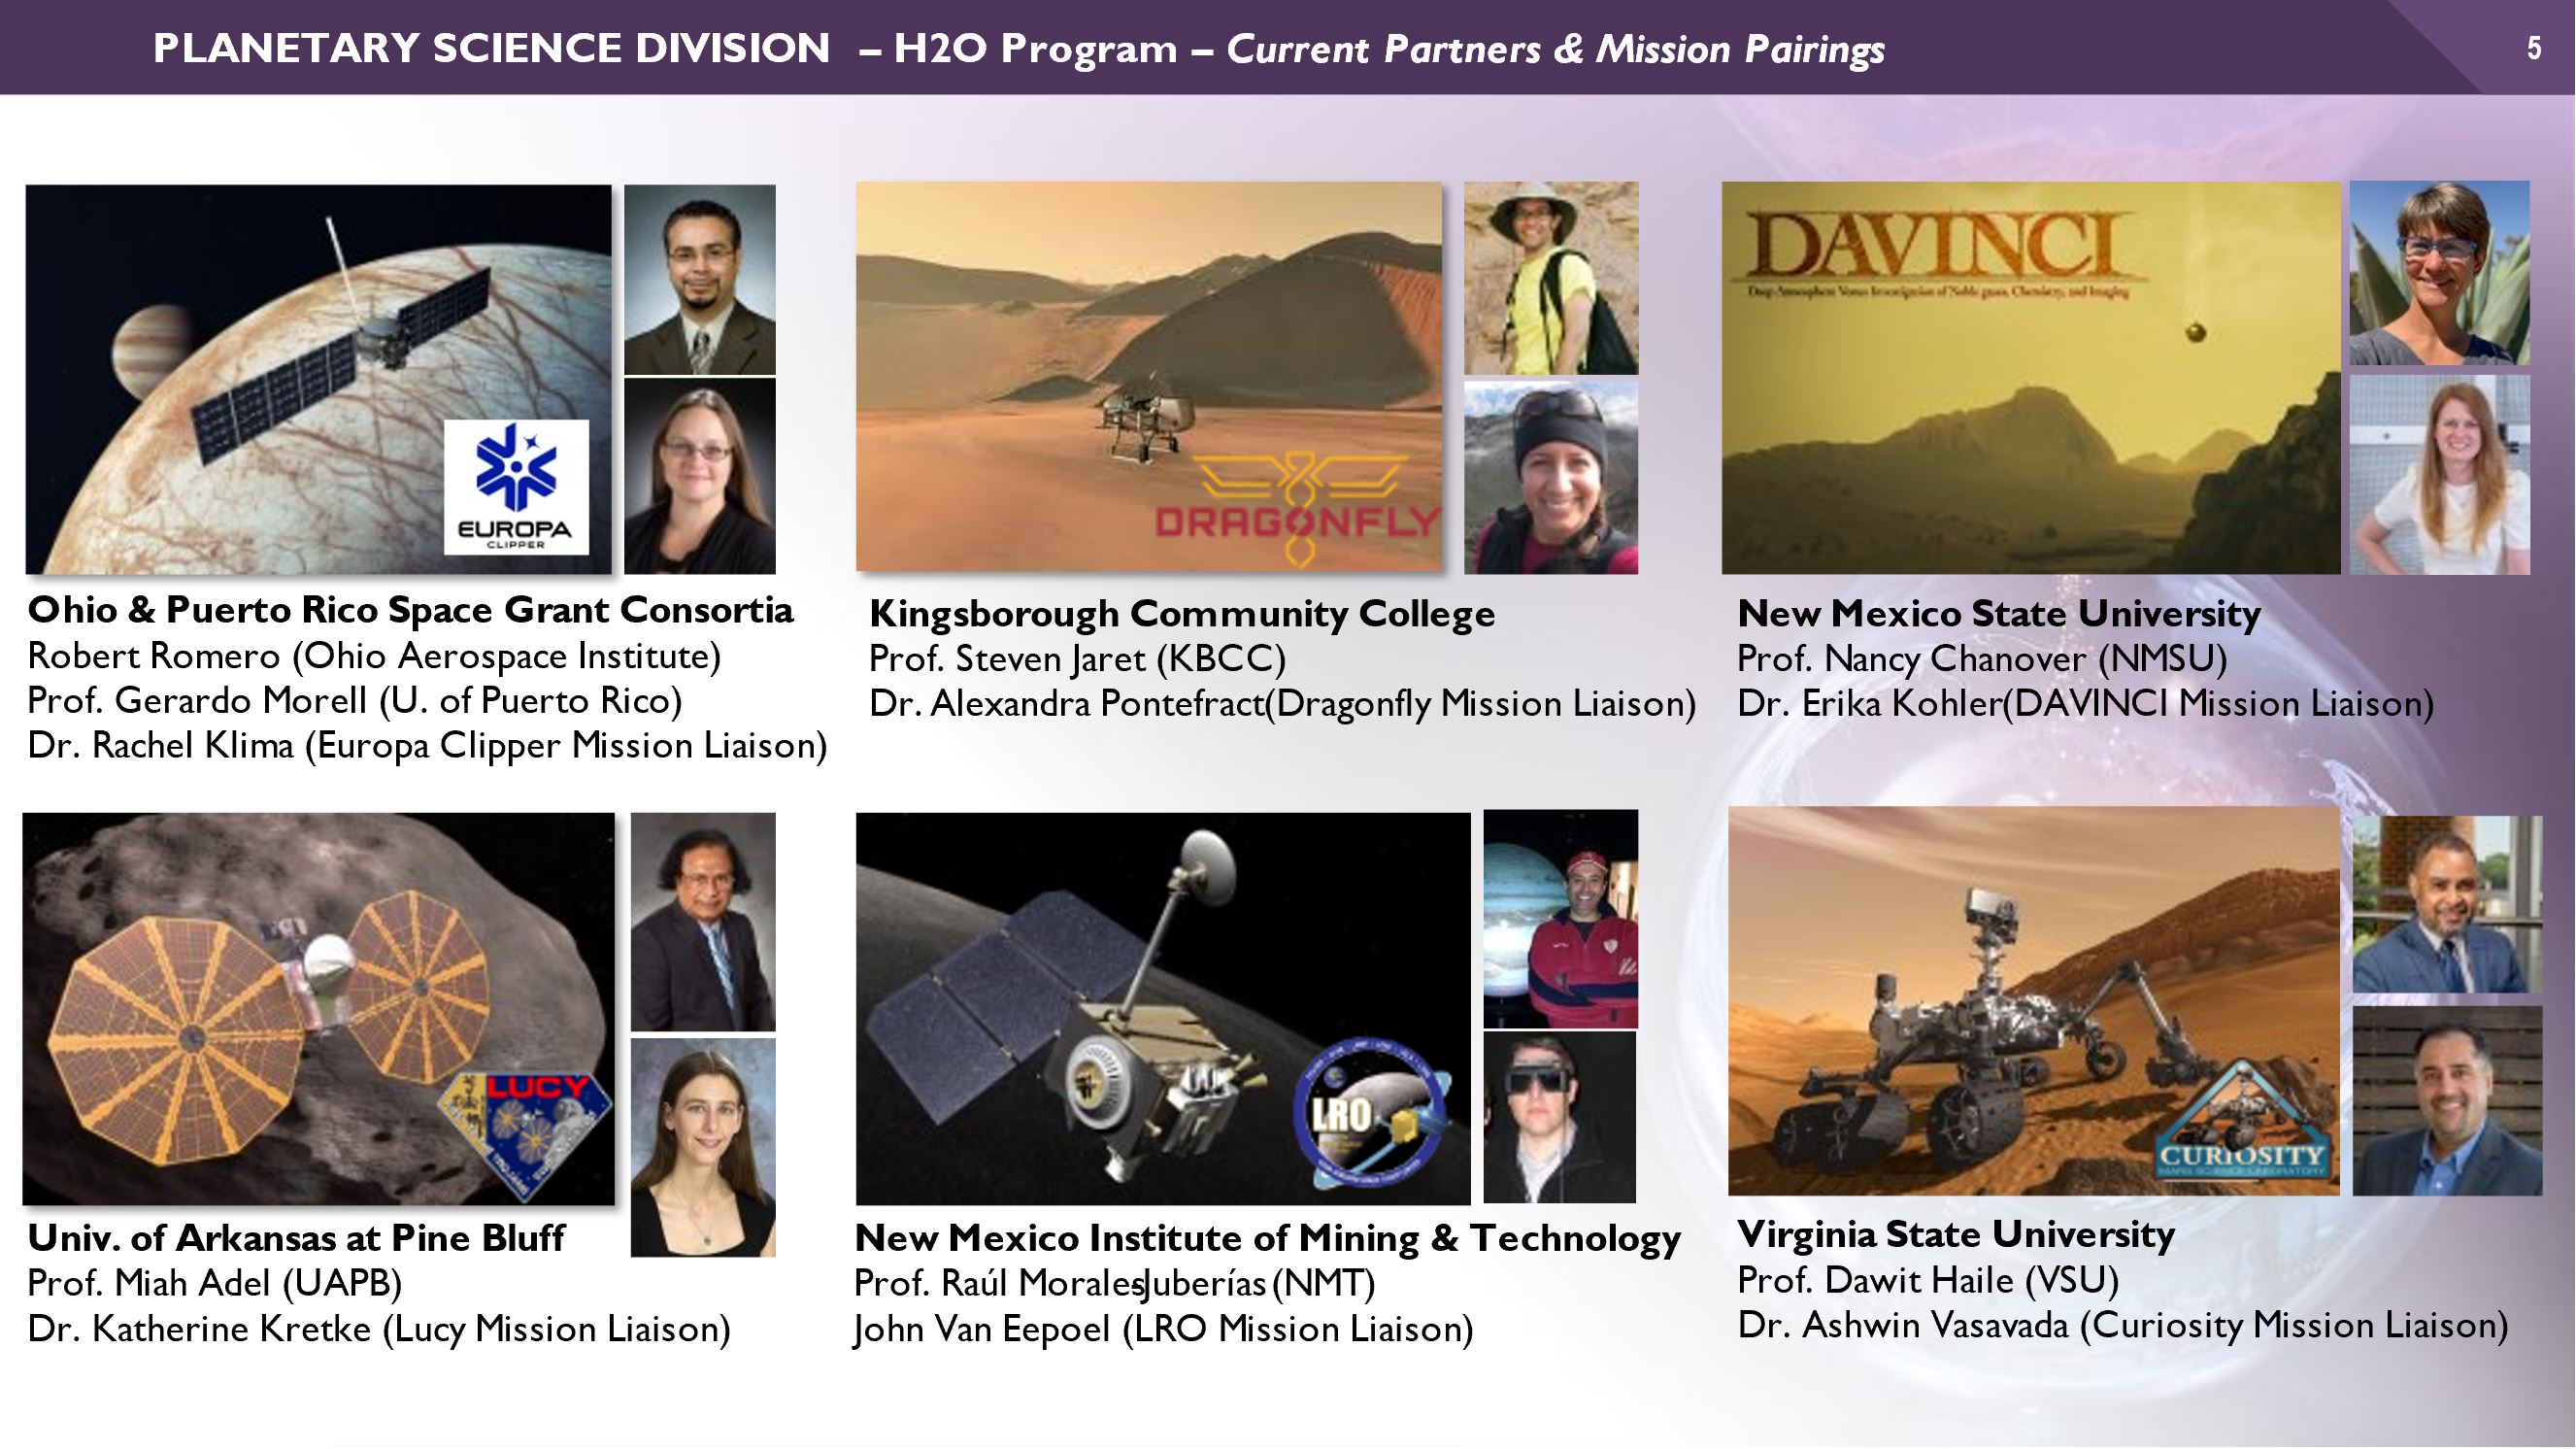 Six-panel graphic showing artistic interpretations of mission images and photographs of university faculty member and mission liaison. There are three missions  across each of two rows.